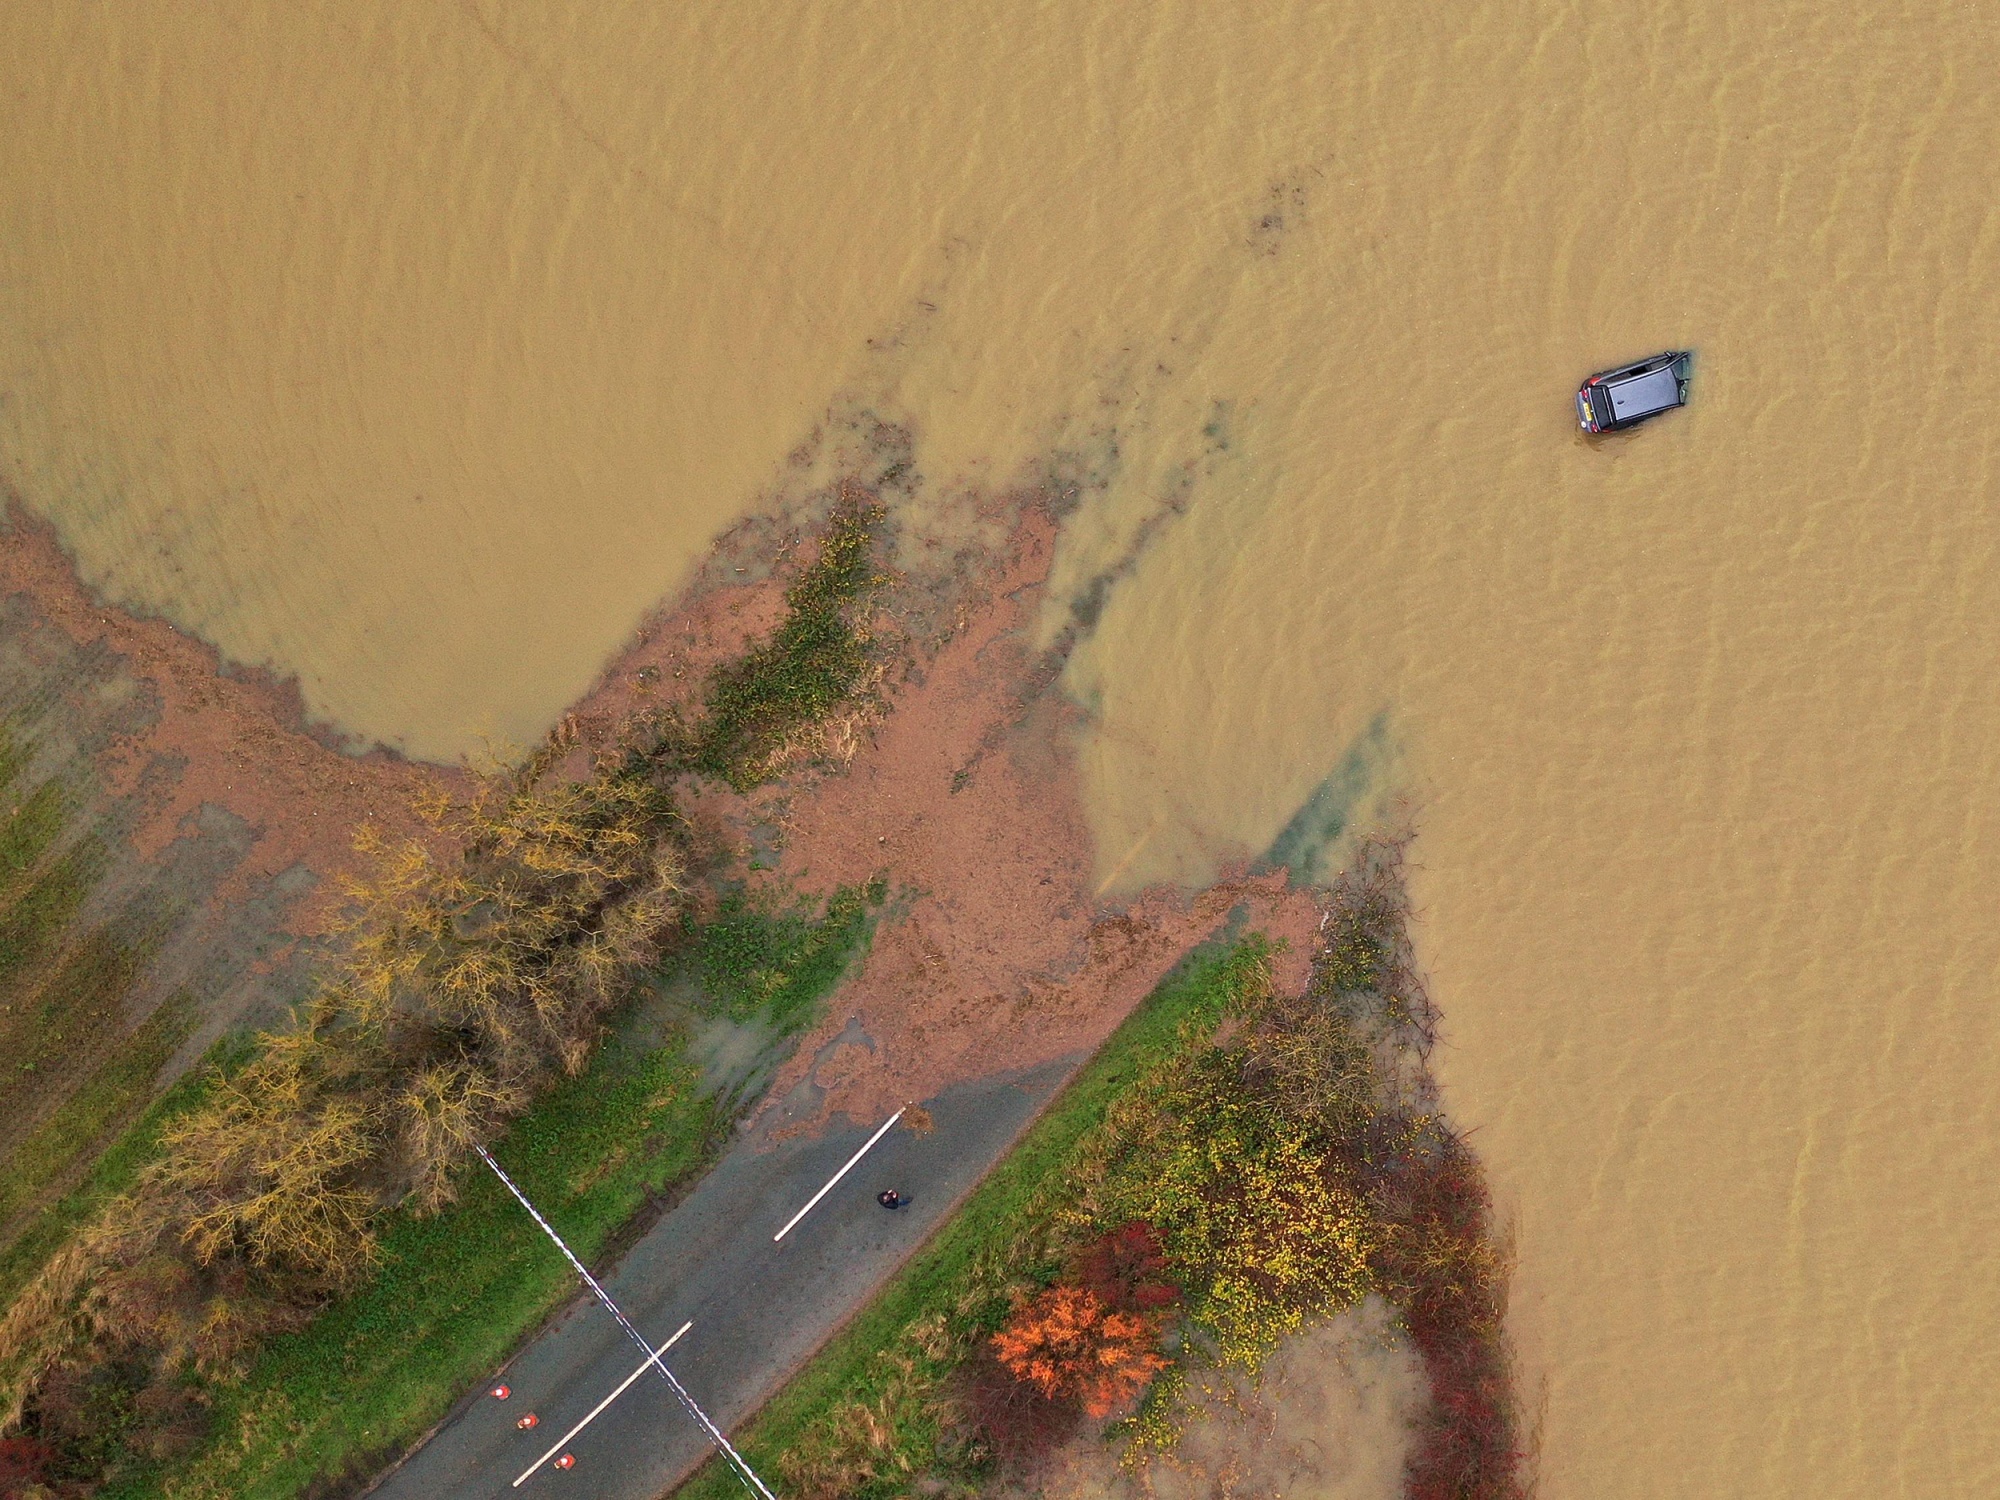 A&nbsp;part submerged&nbsp;car during flooding in the U.K. in October.&nbsp;Companies are being asked how much their mortgage loans could be affected by rising sea levels or flooding.